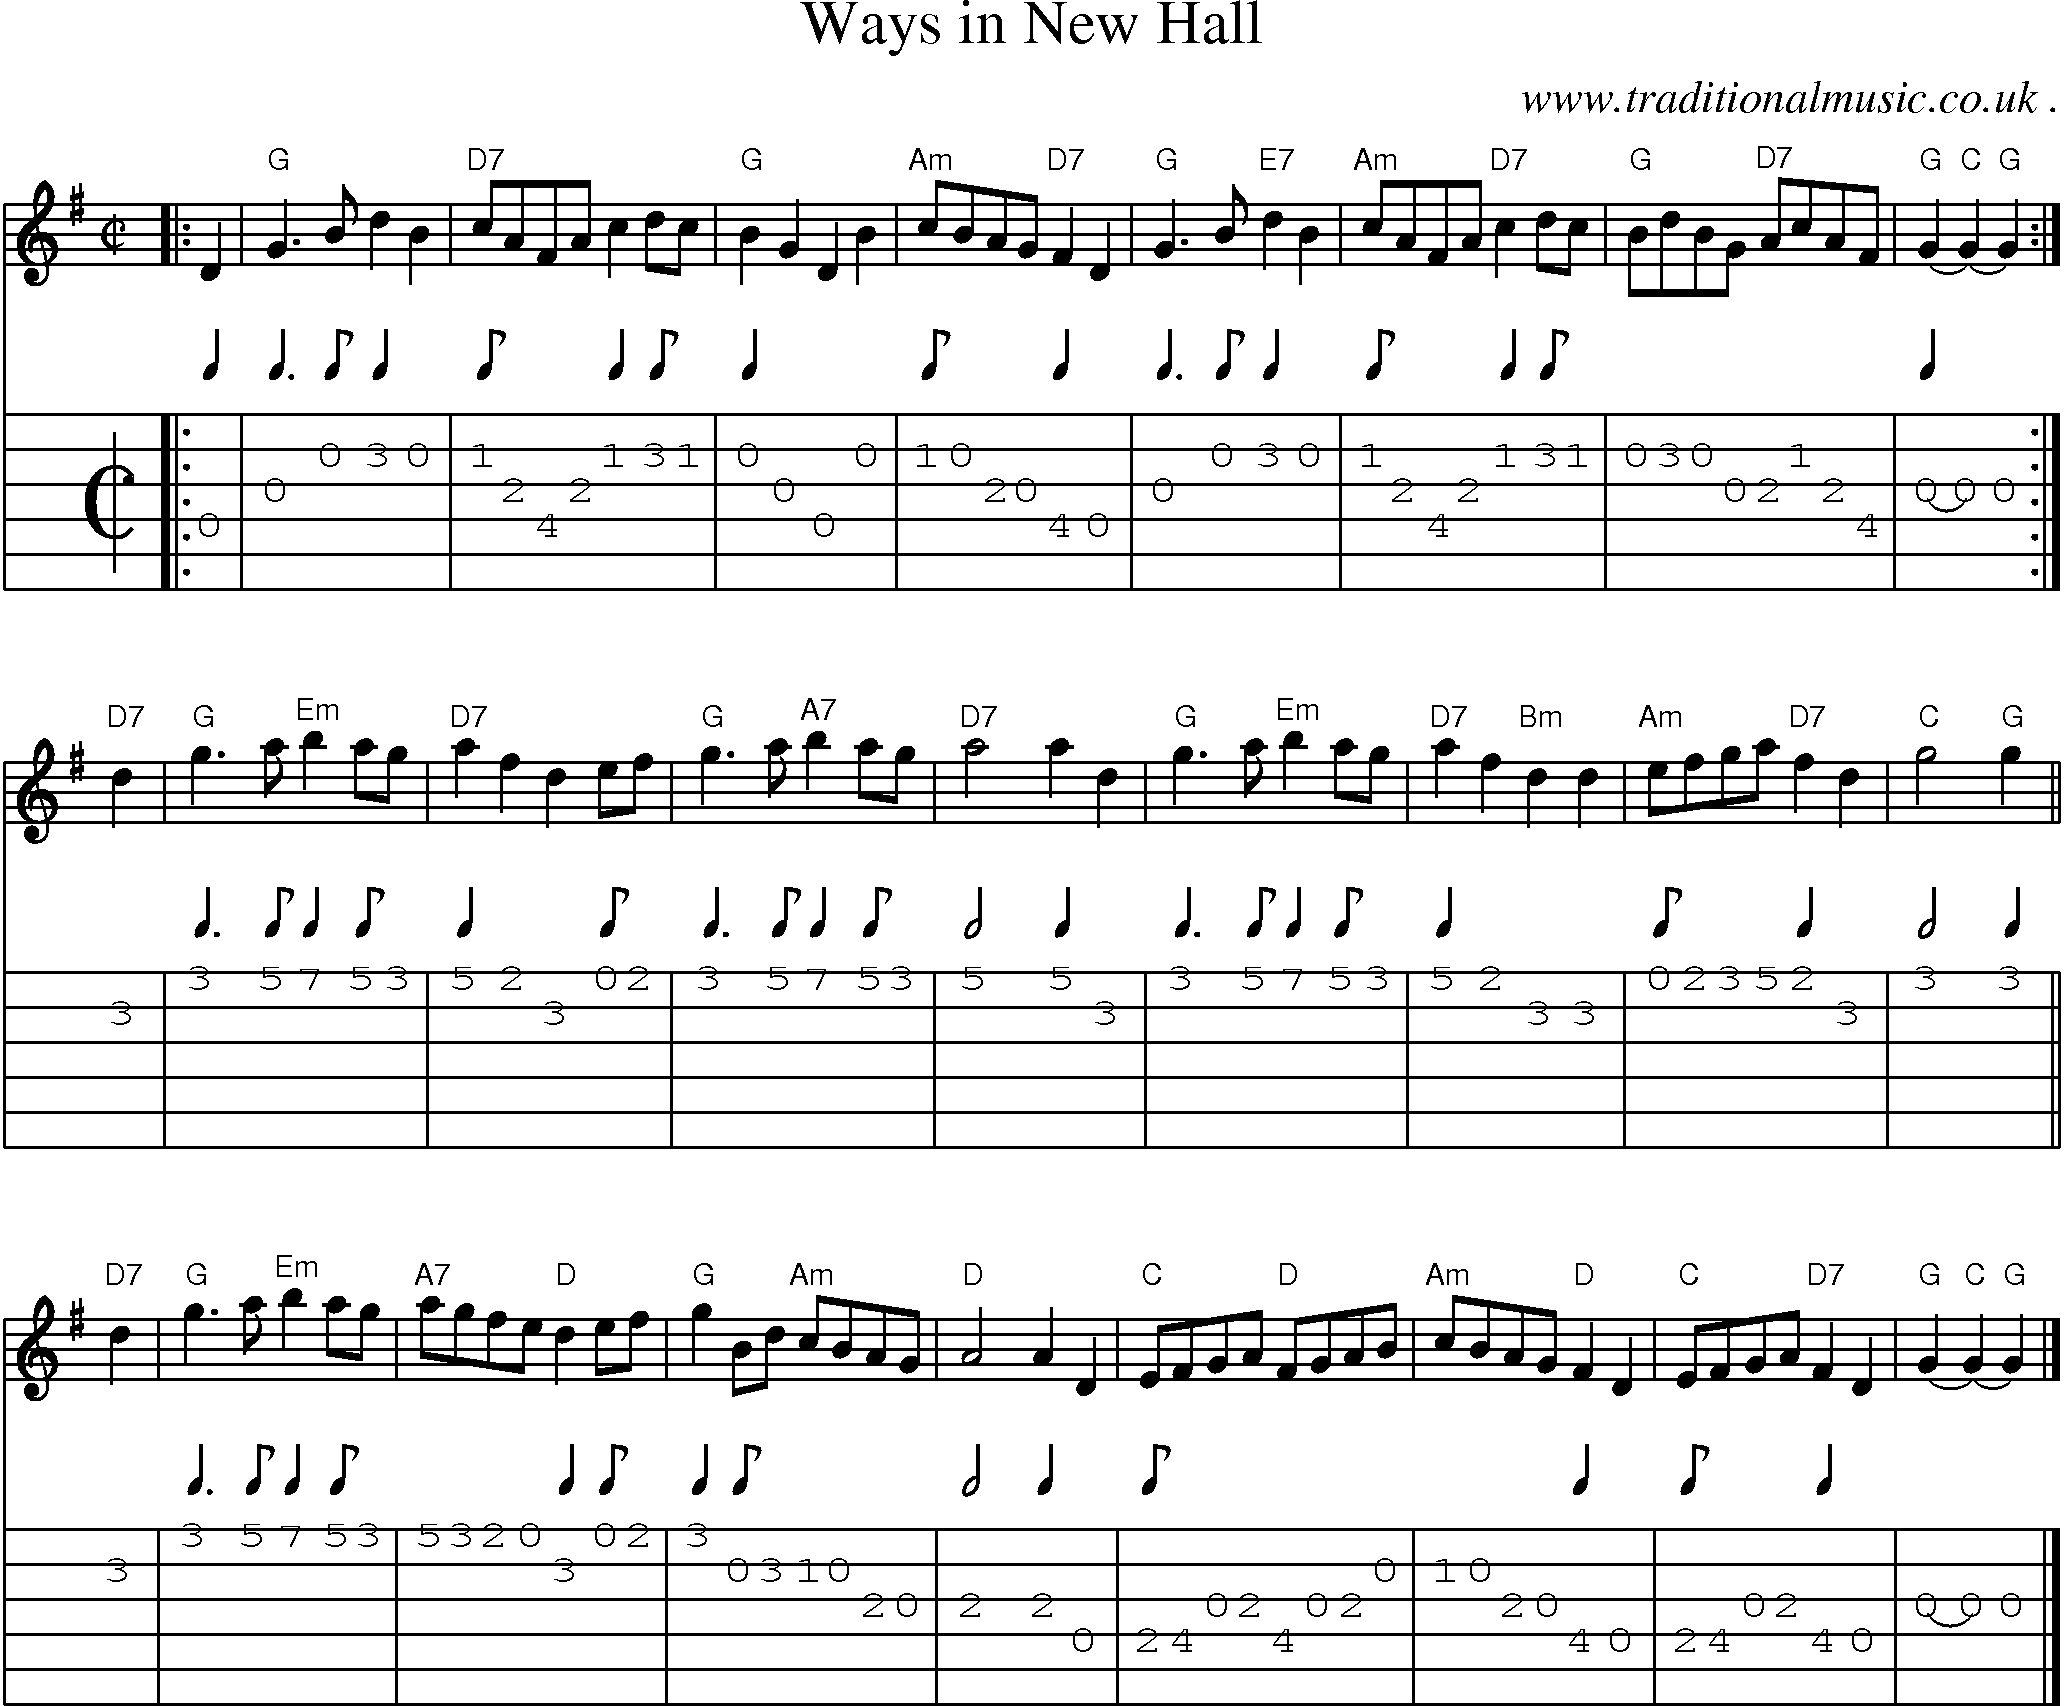 Sheet-music  score, Chords and Guitar Tabs for Ways In New Hall